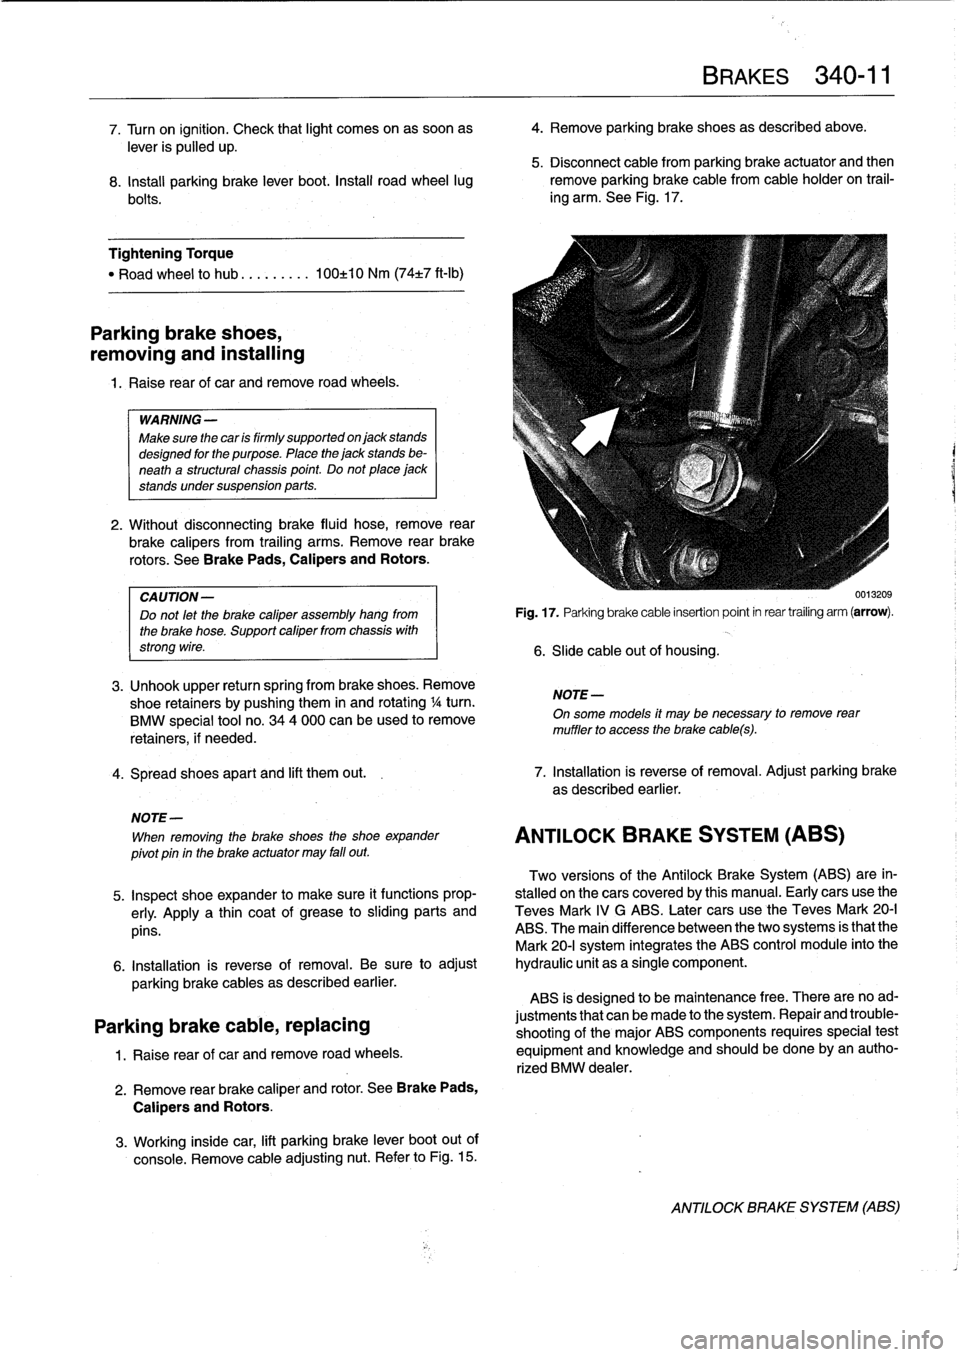 BMW 323i 1993 E36 Service Manual 
7
.
Turn
on
ignition
.
Check
that
light
comes
on
as
soonas

	

4
.
Remove
parkíng
brake
shoes
as
described
above
.

lever
is
pulled
up
.
5
.
Disconnect
cable
from
parking
brake
actuator
and
then

8
